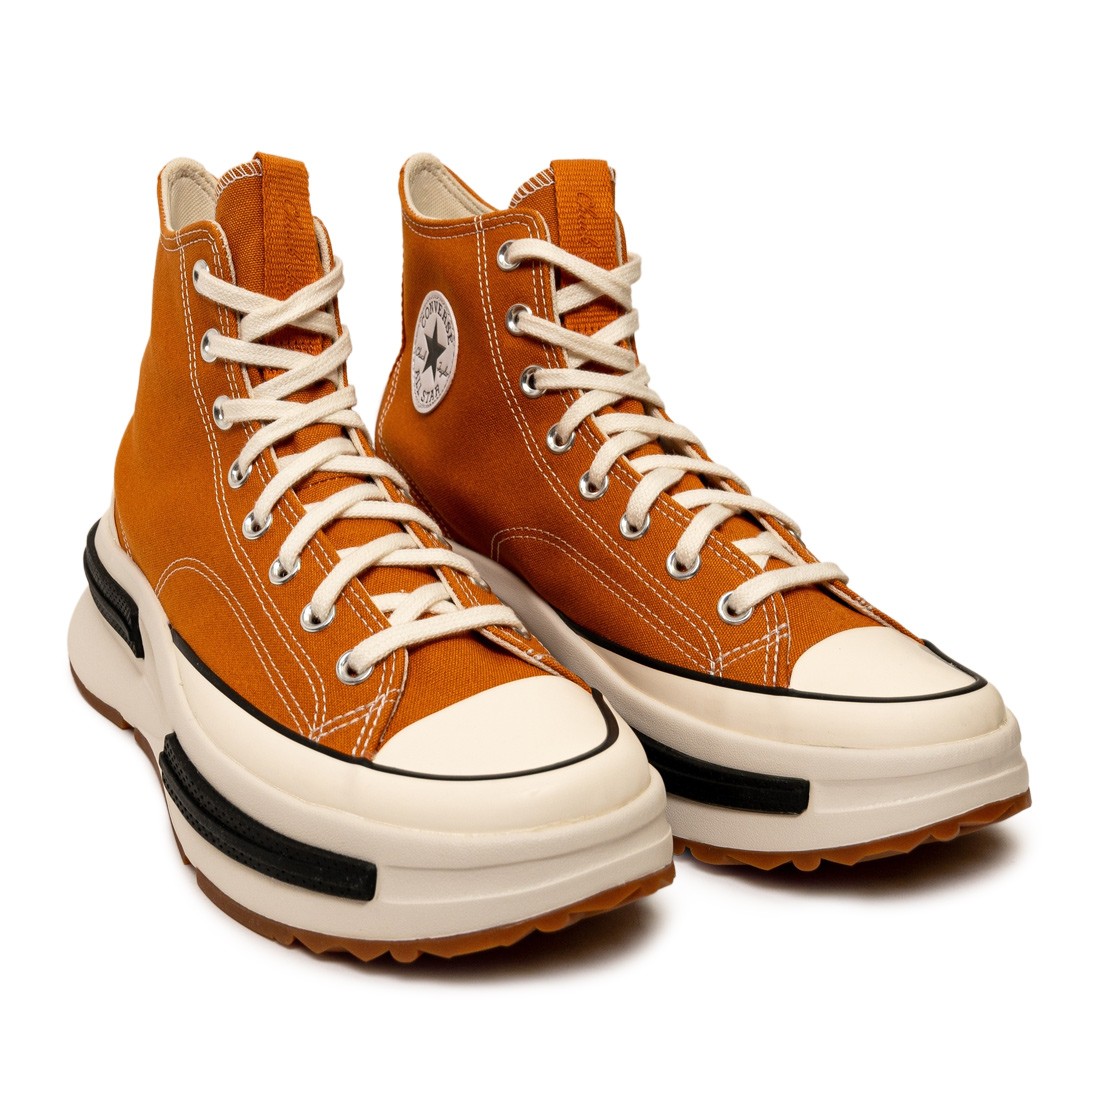 product eng 1030541 Converse Chuck Taylor All Star Winter Waterproof